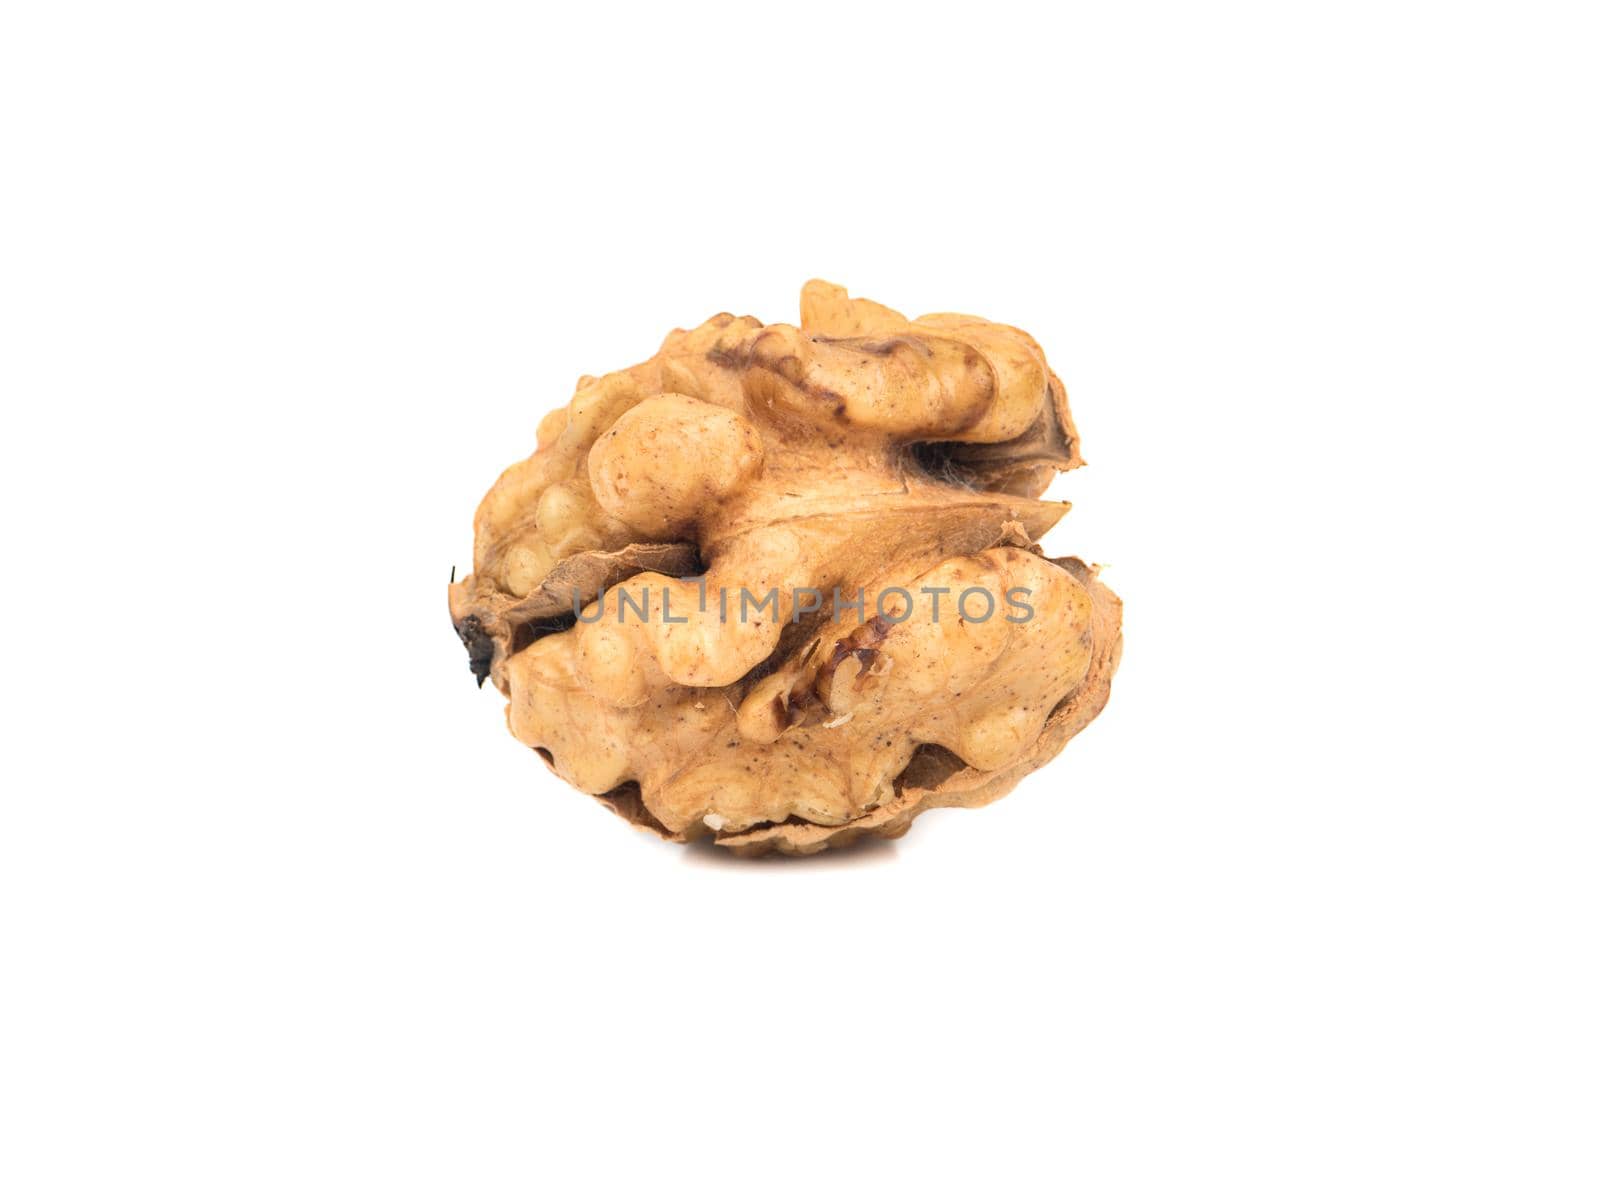 Fresh walnuts without the shell on white background